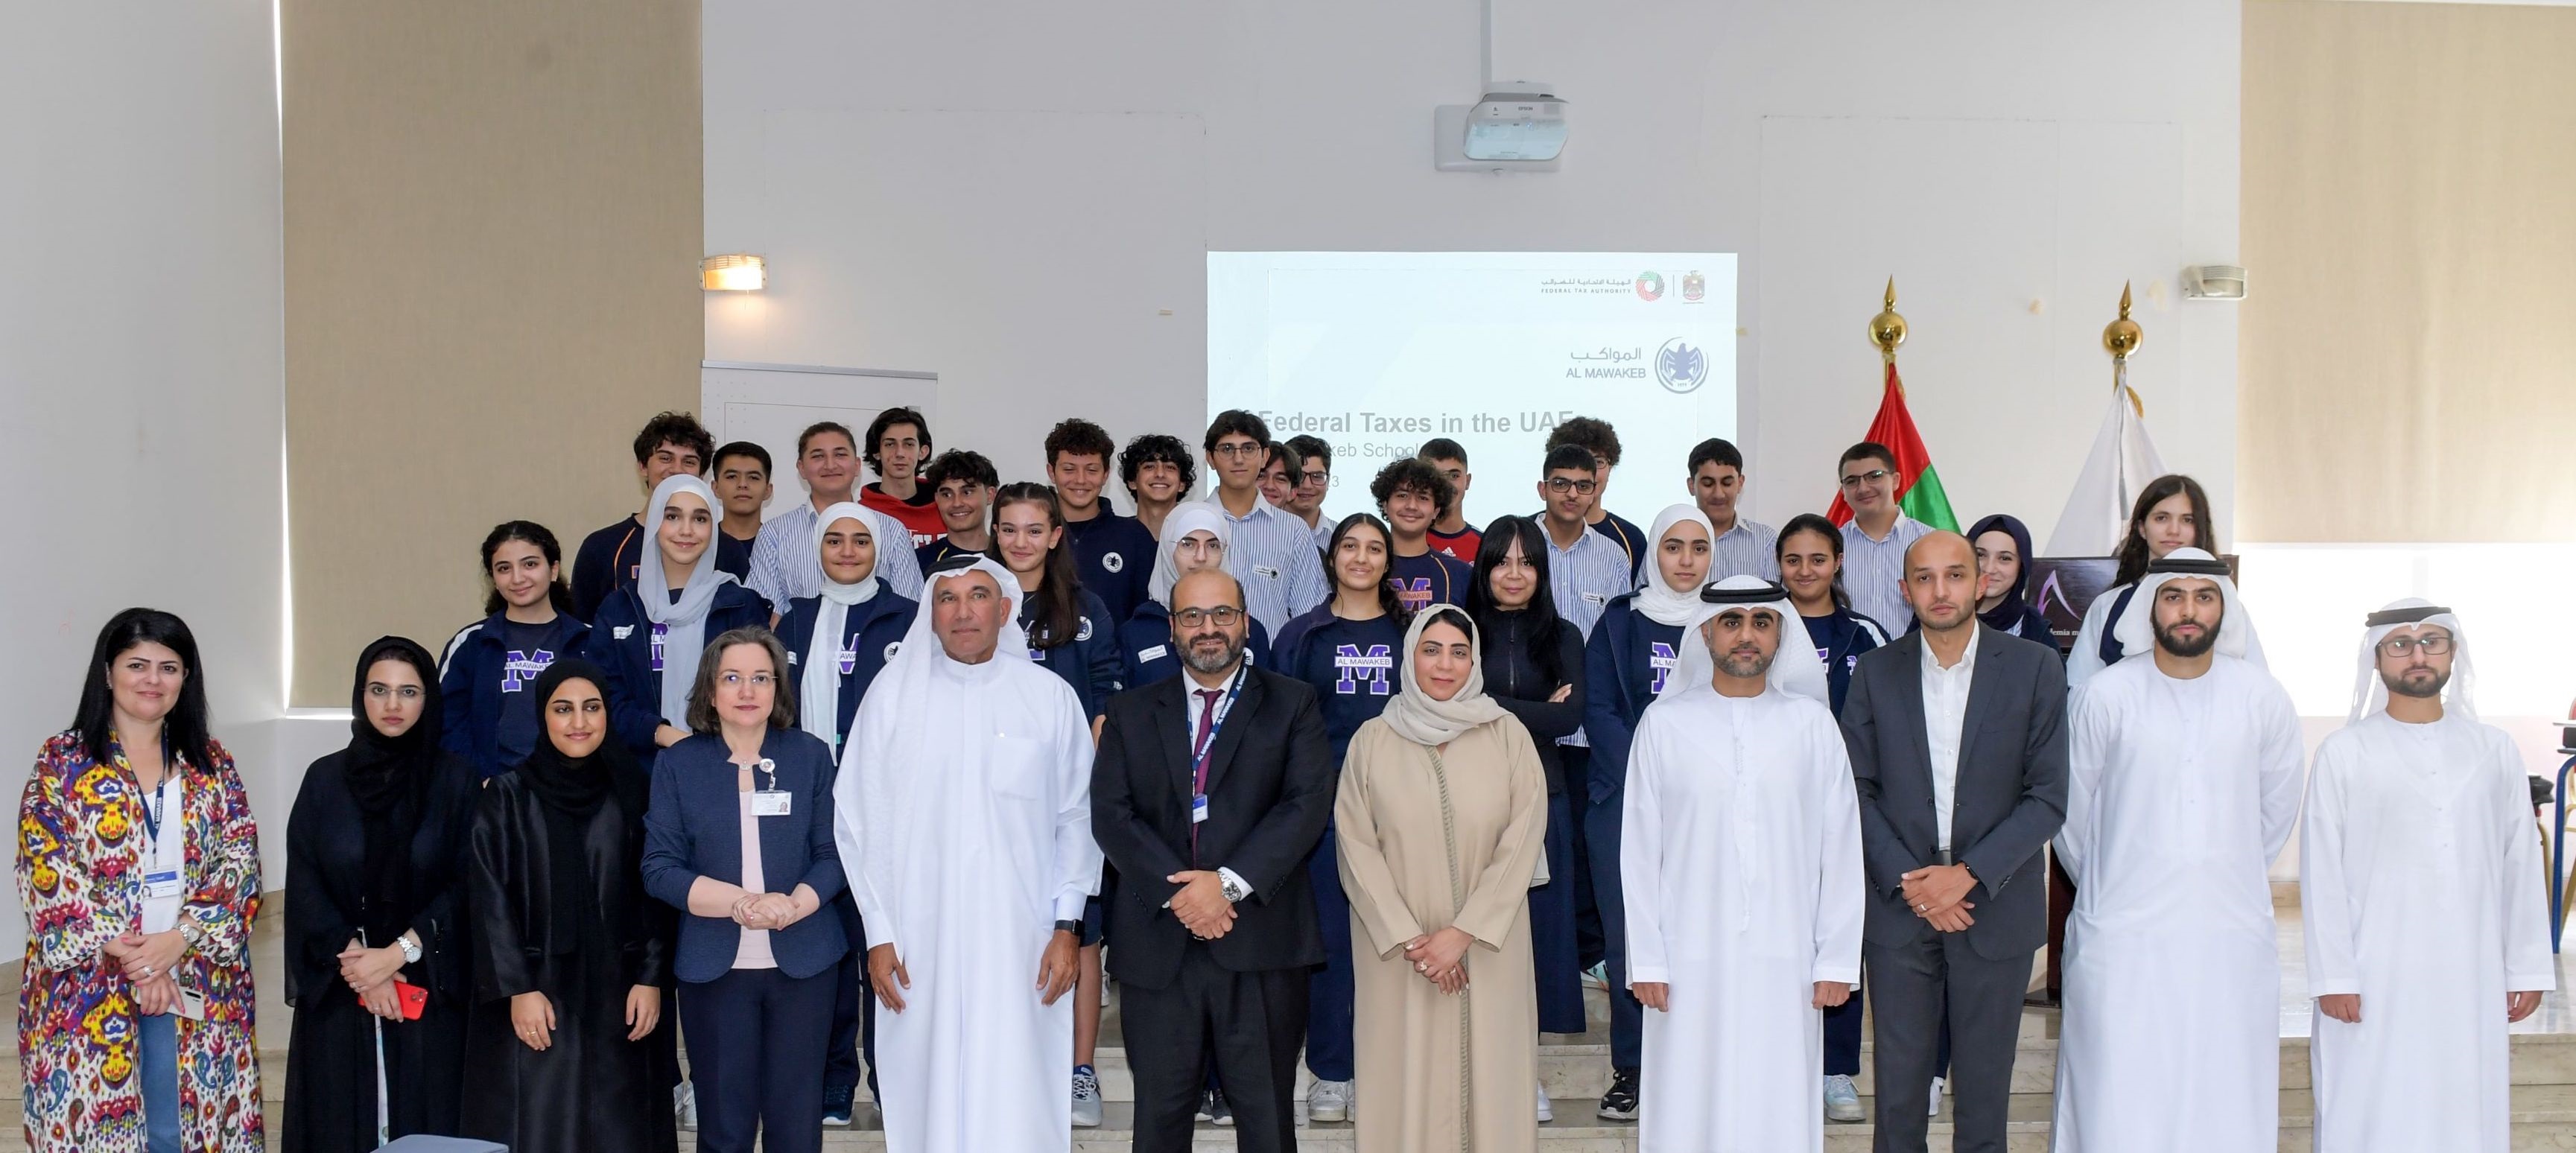 Federal Tax Authority launches new series of events to promote tax awareness among school and university students